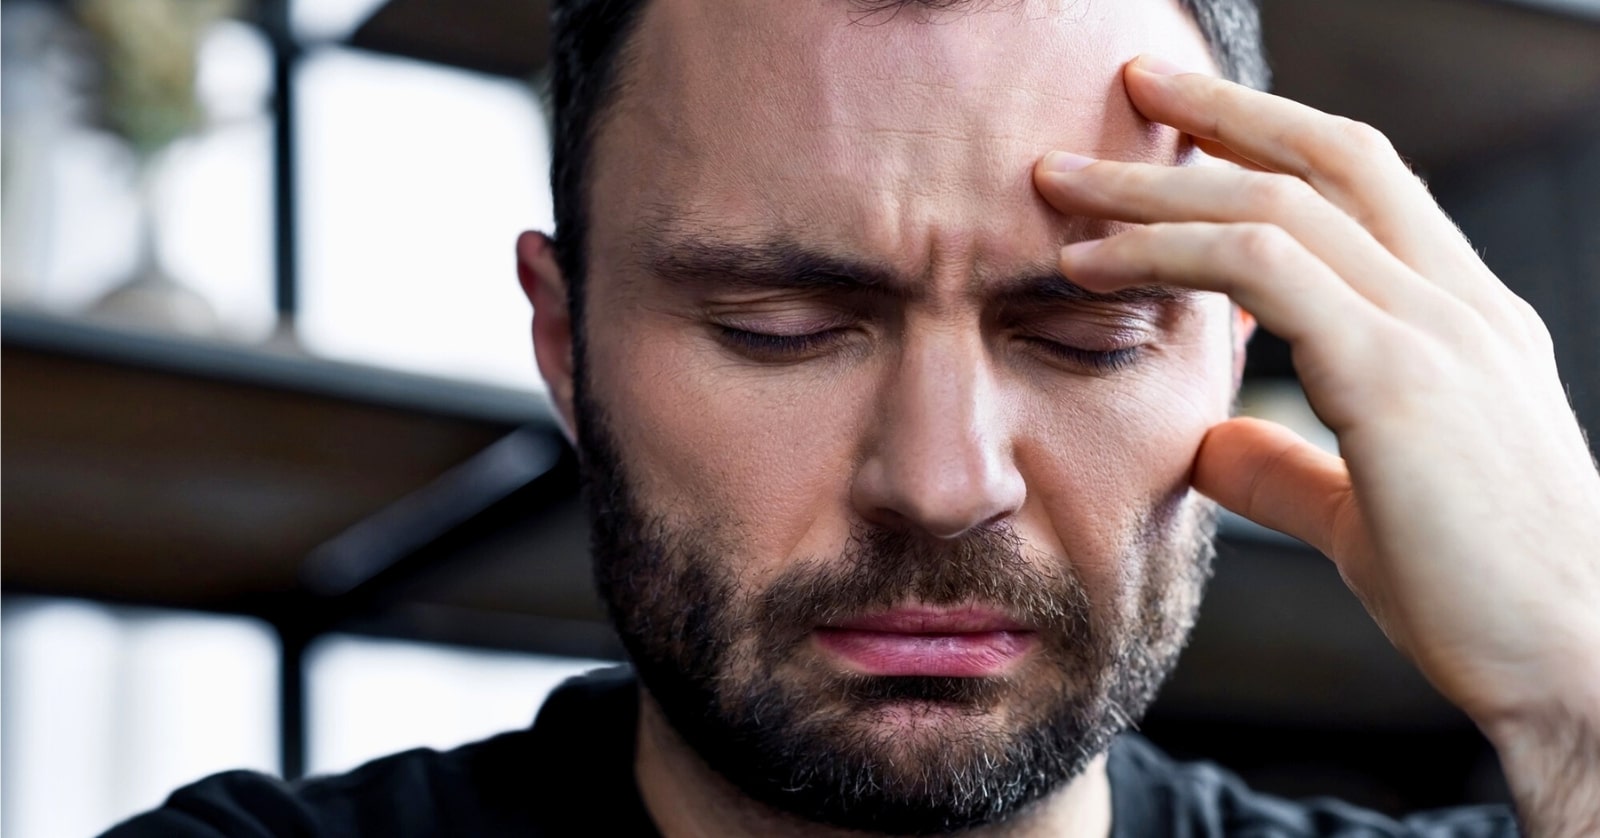 man with fingers pressed against his forehead as he struggles with his mental health